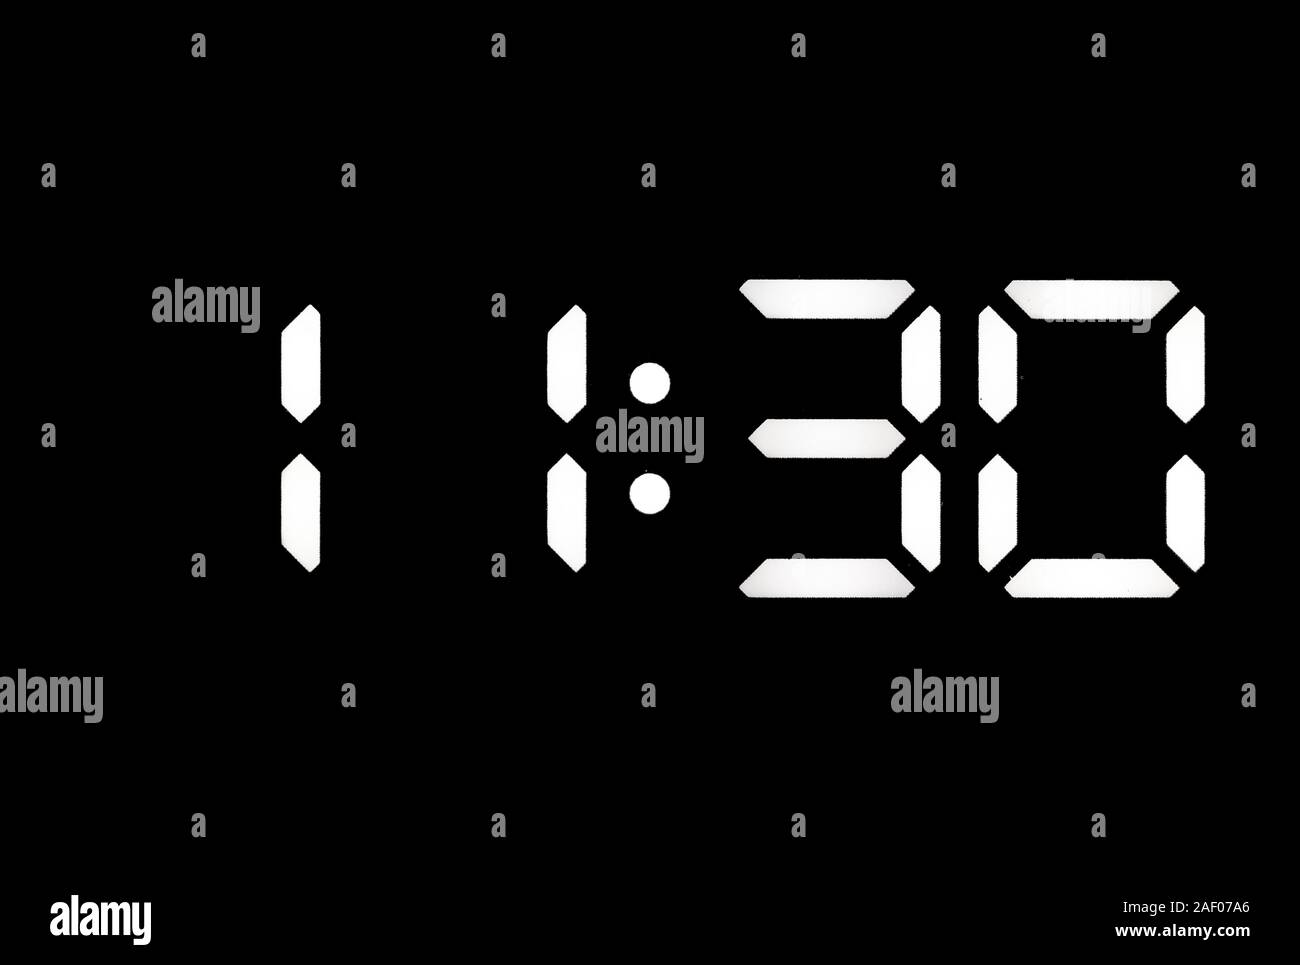 Real white led digital clock on a black background showing time 11:30 Stock Photo